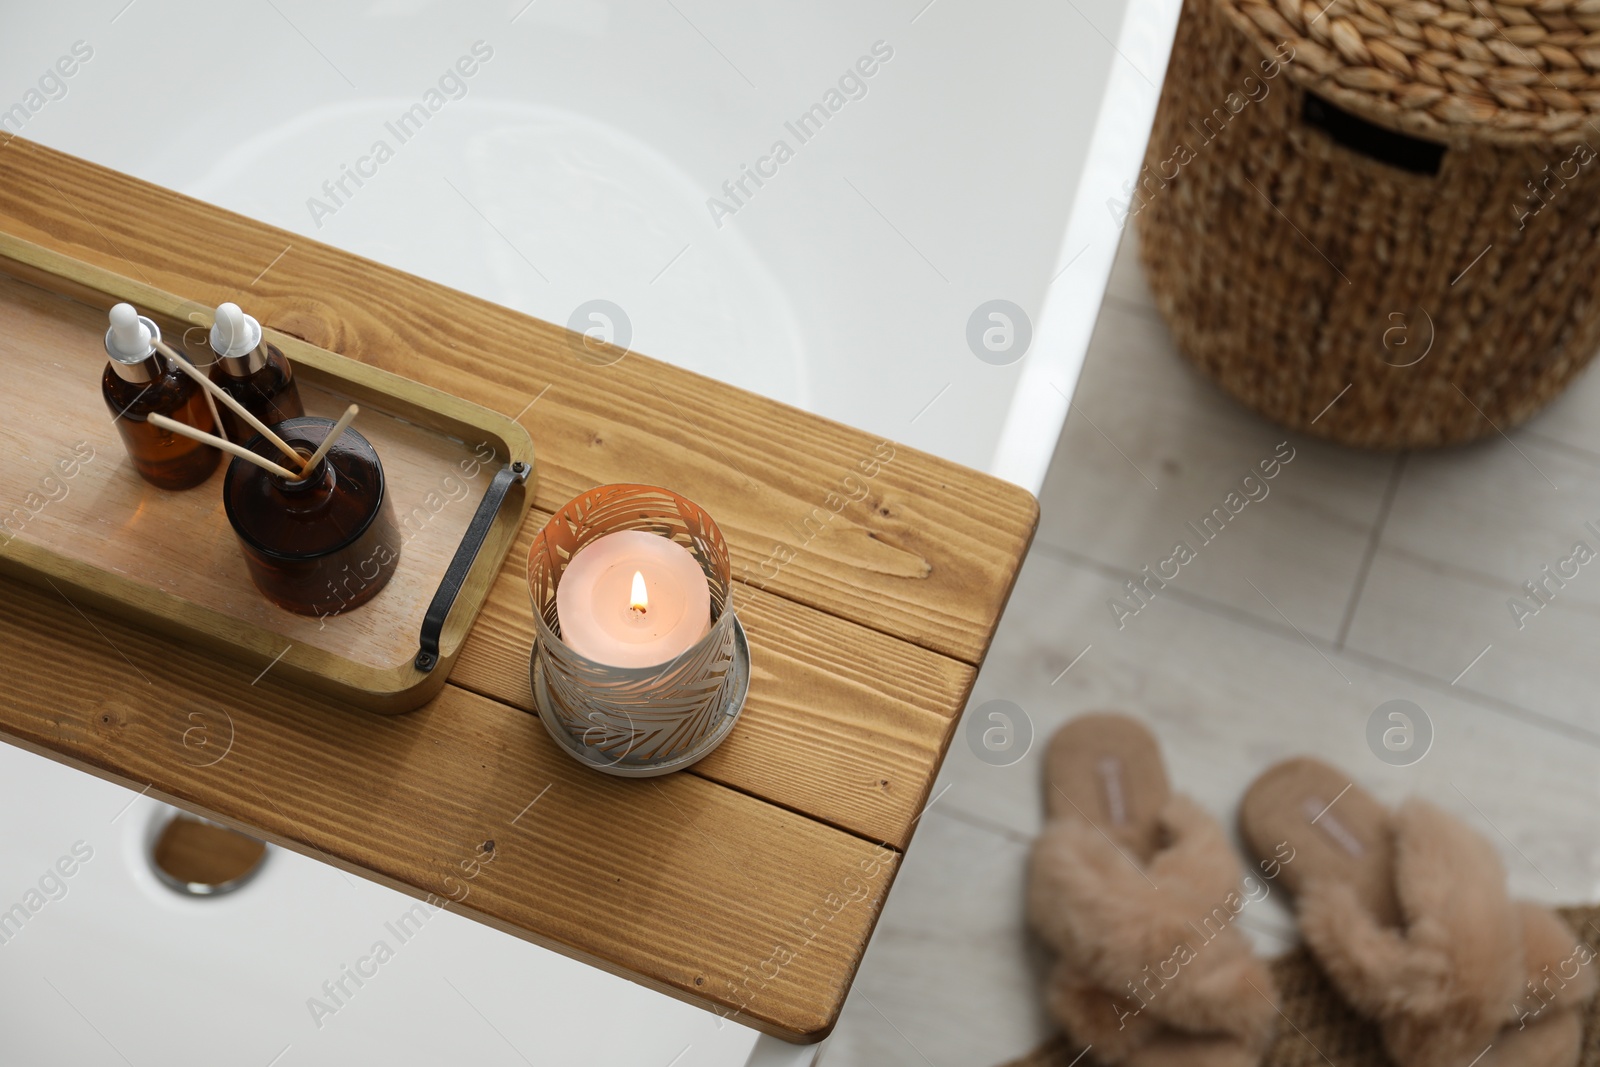 Photo of Wooden tray with cosmetic products, burning candle and reed air freshener on bath tub in bathroom, above view